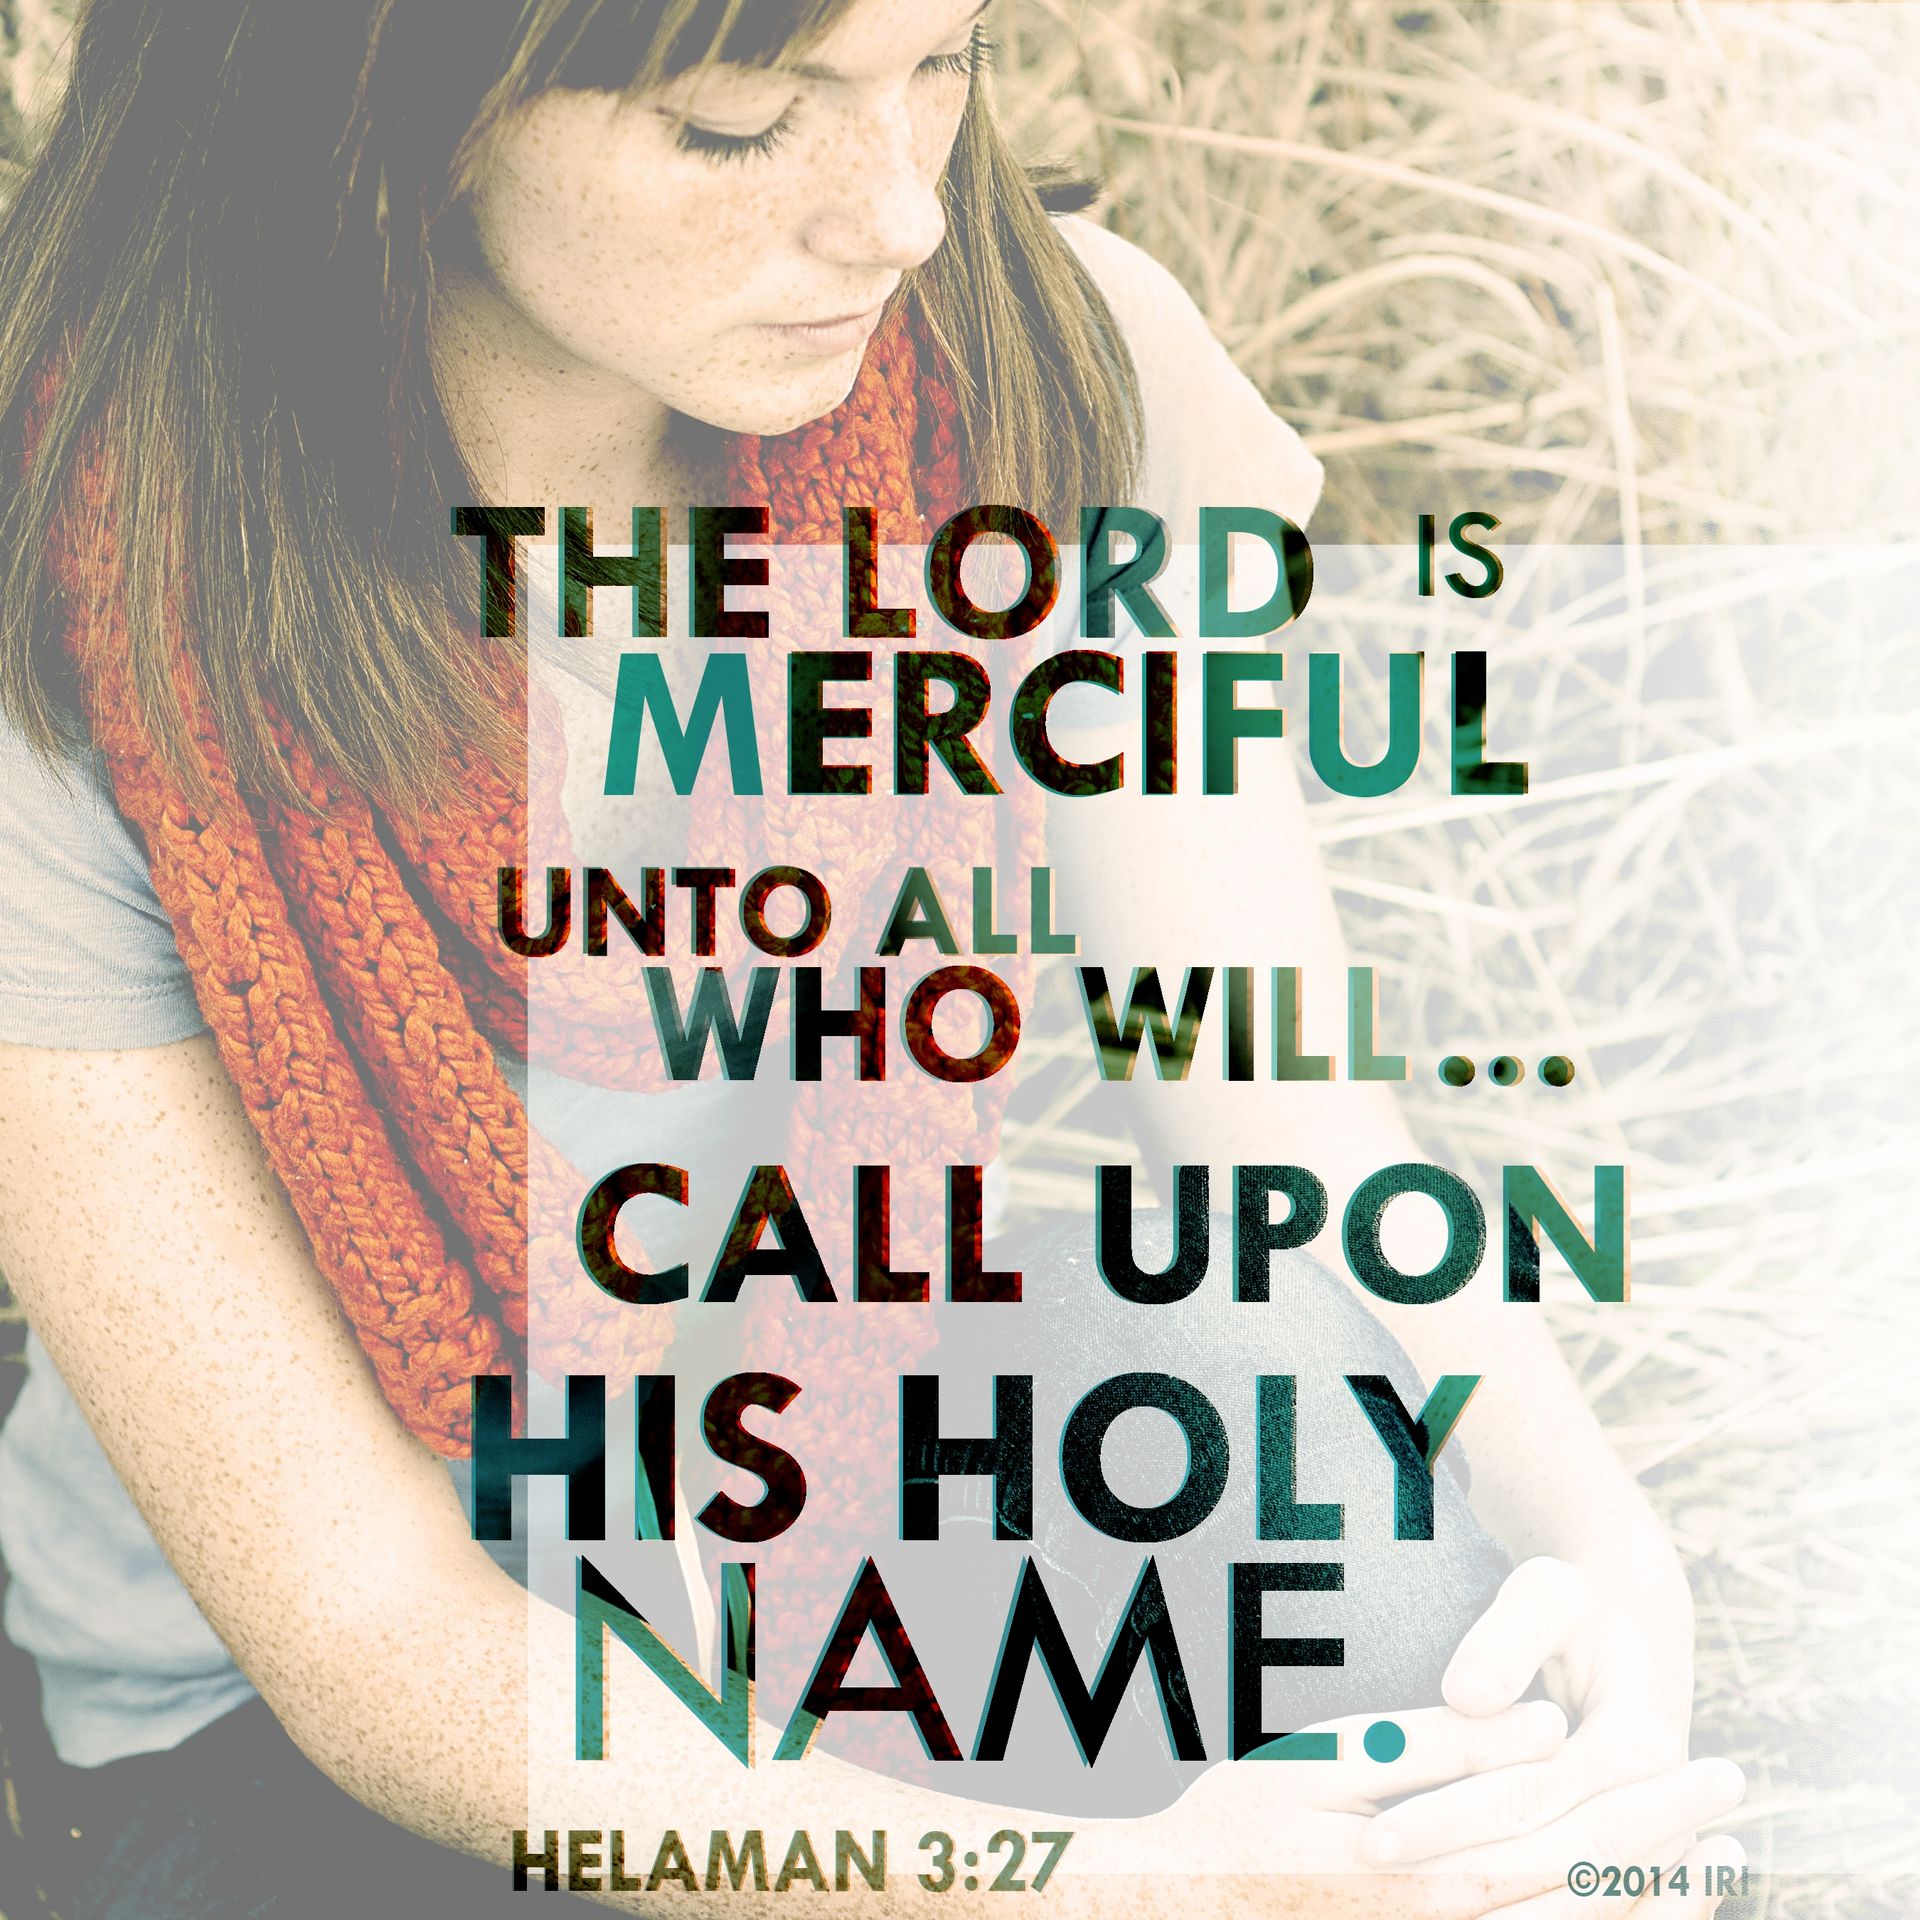 “The Lord is merciful unto all who will … call upon his holy name.”—Helaman 3:27